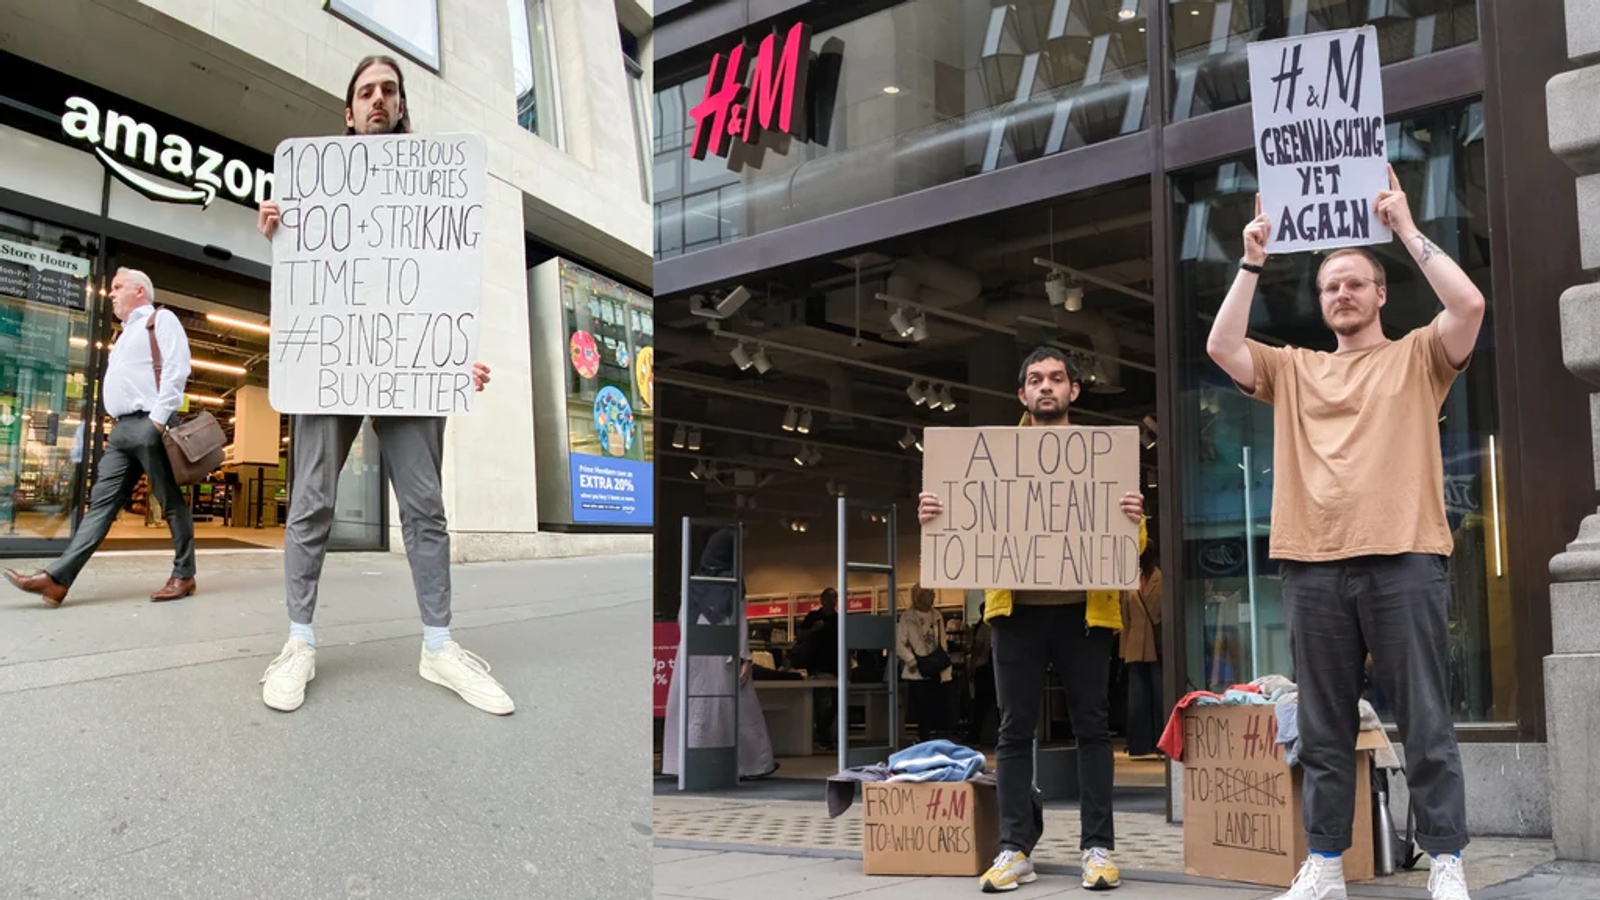 The Canopey team holding signs in front of Amazon and H&M stores